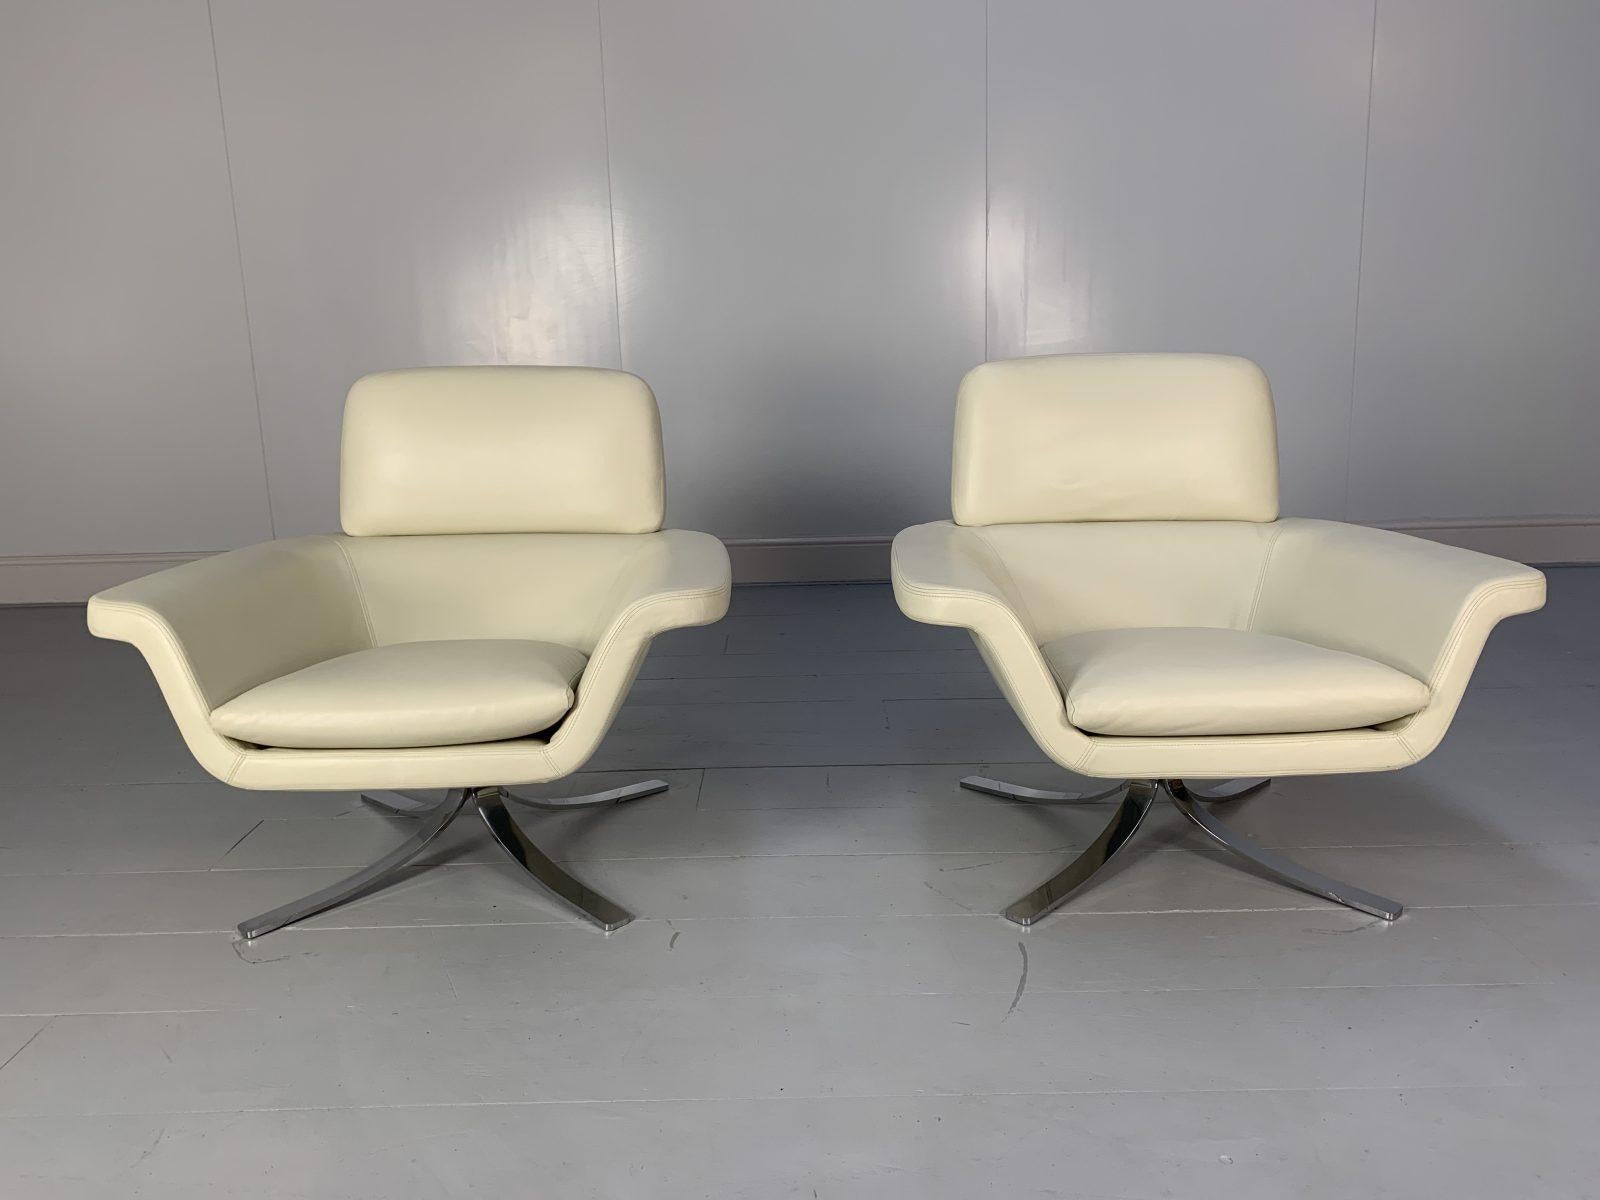 Hello Friends, and welcome to another unmissable offering from Lord Browns Furniture, the UK’s premier resource for fine Sofas and Chairs.

On offer on this occasion is a sublime, identical pair of Minotti “Blake Soft” armchairs, dressed in a